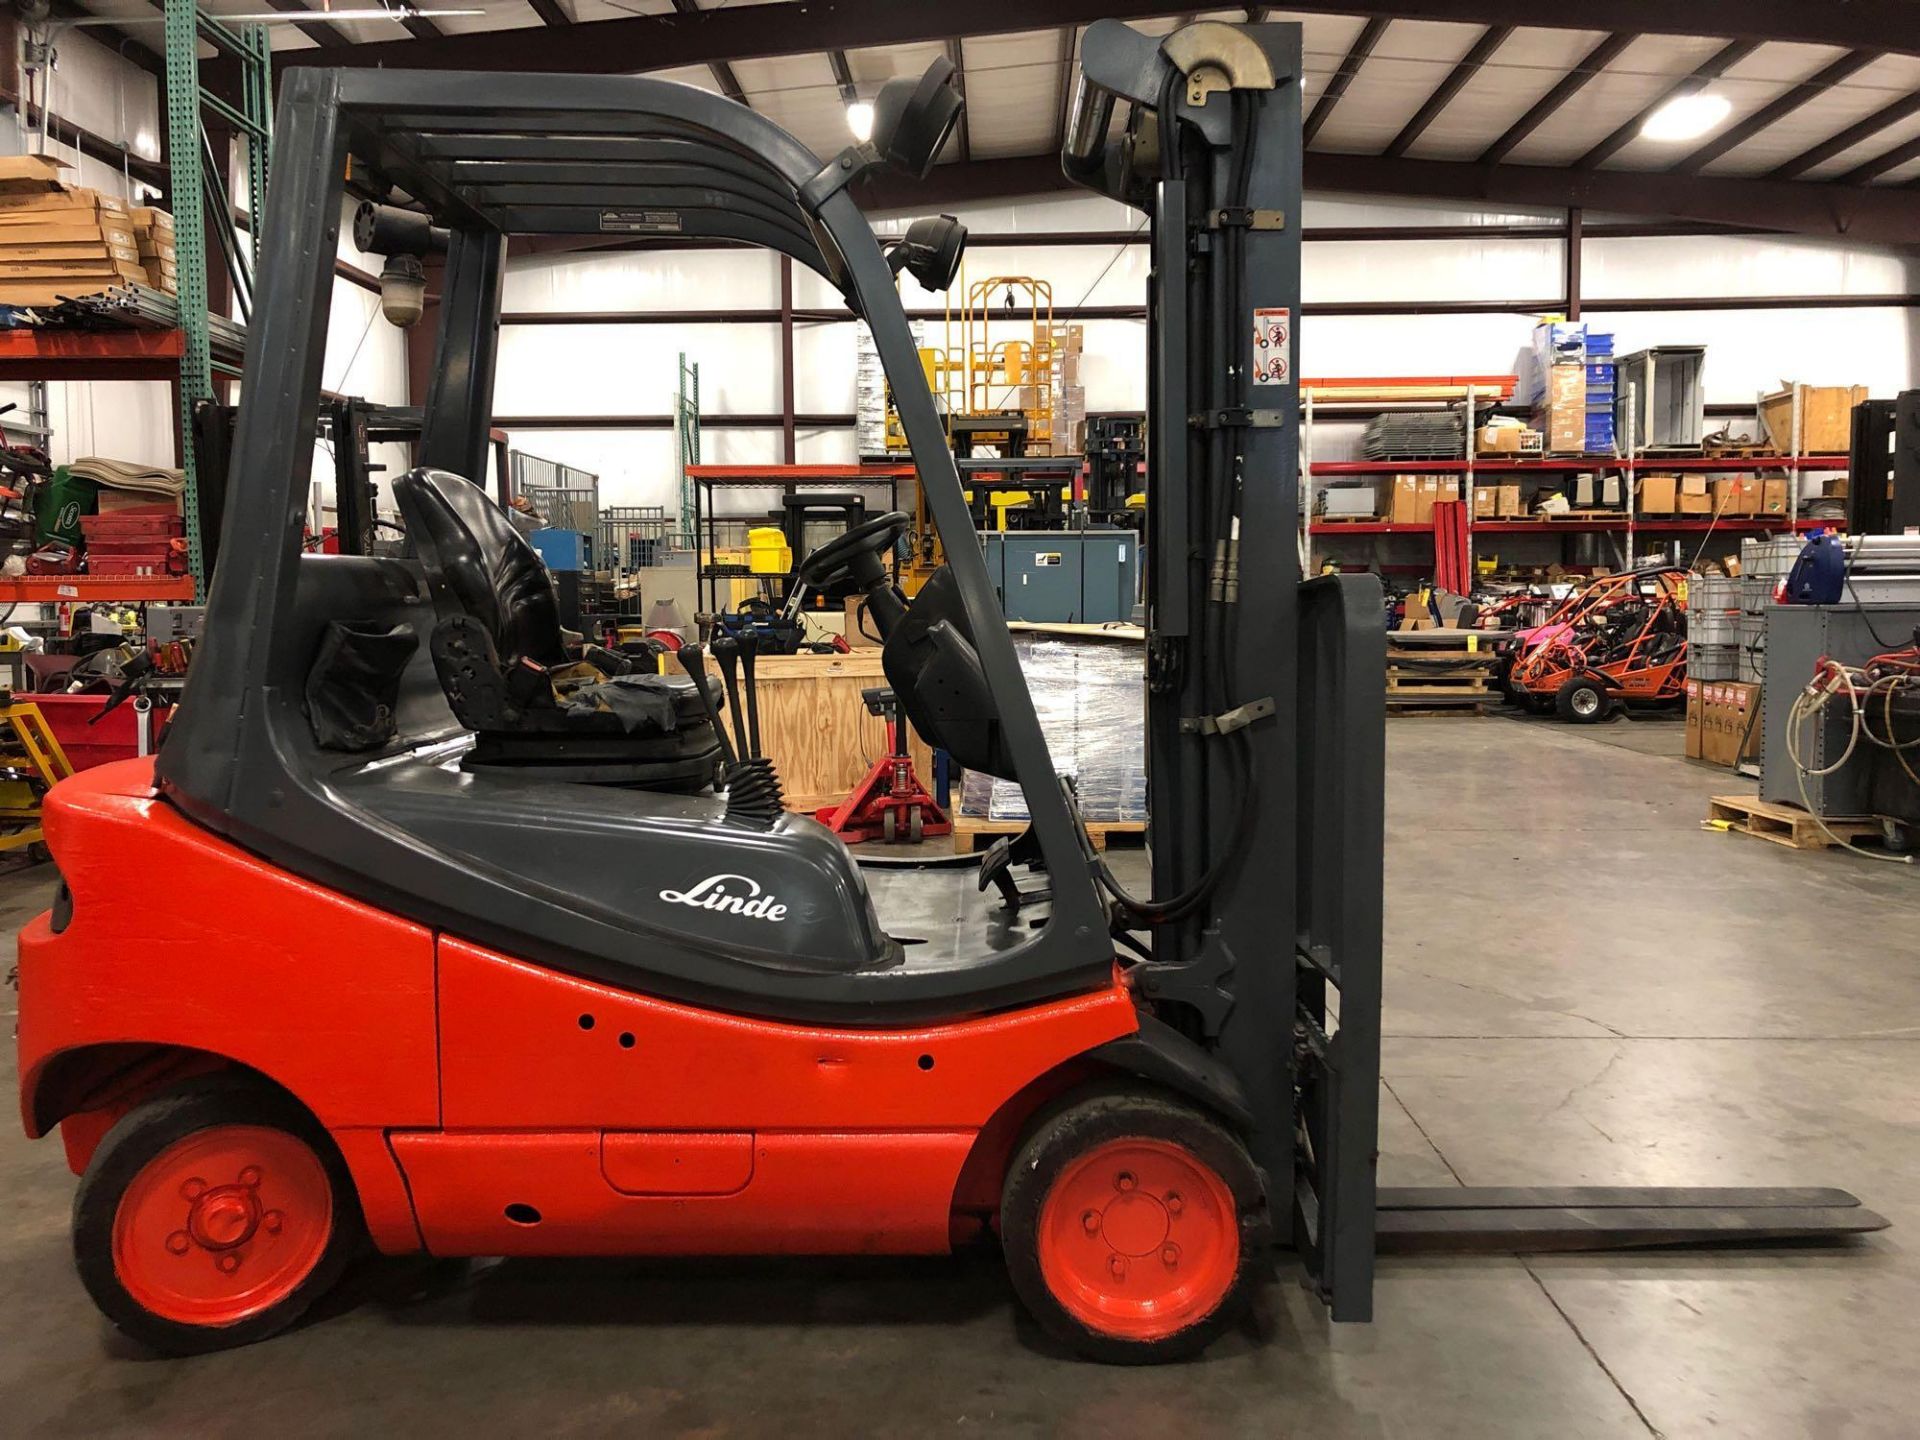 LINDE DIESEL FORKLIFT MODEL H20CD, 4,500 LB CAPACITY, 175" HEIGHT CAPACITY, TILT, RUNS AND OPERATES - Image 3 of 5